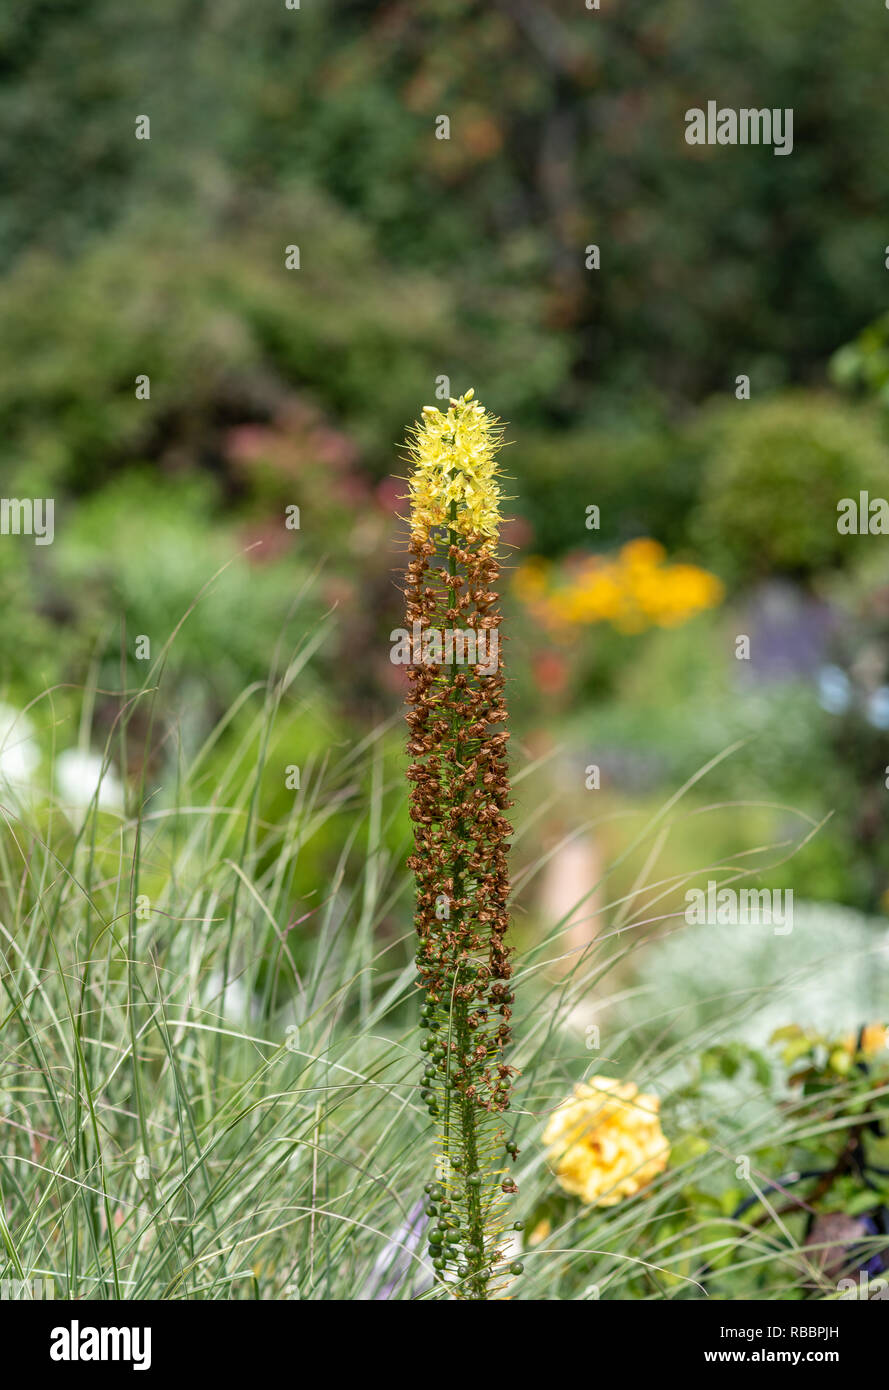 Colorful outdoor floral image of a single upright standing desert candle / foxtail lily with a blurred natural garden background taken on a bright day Stock Photo